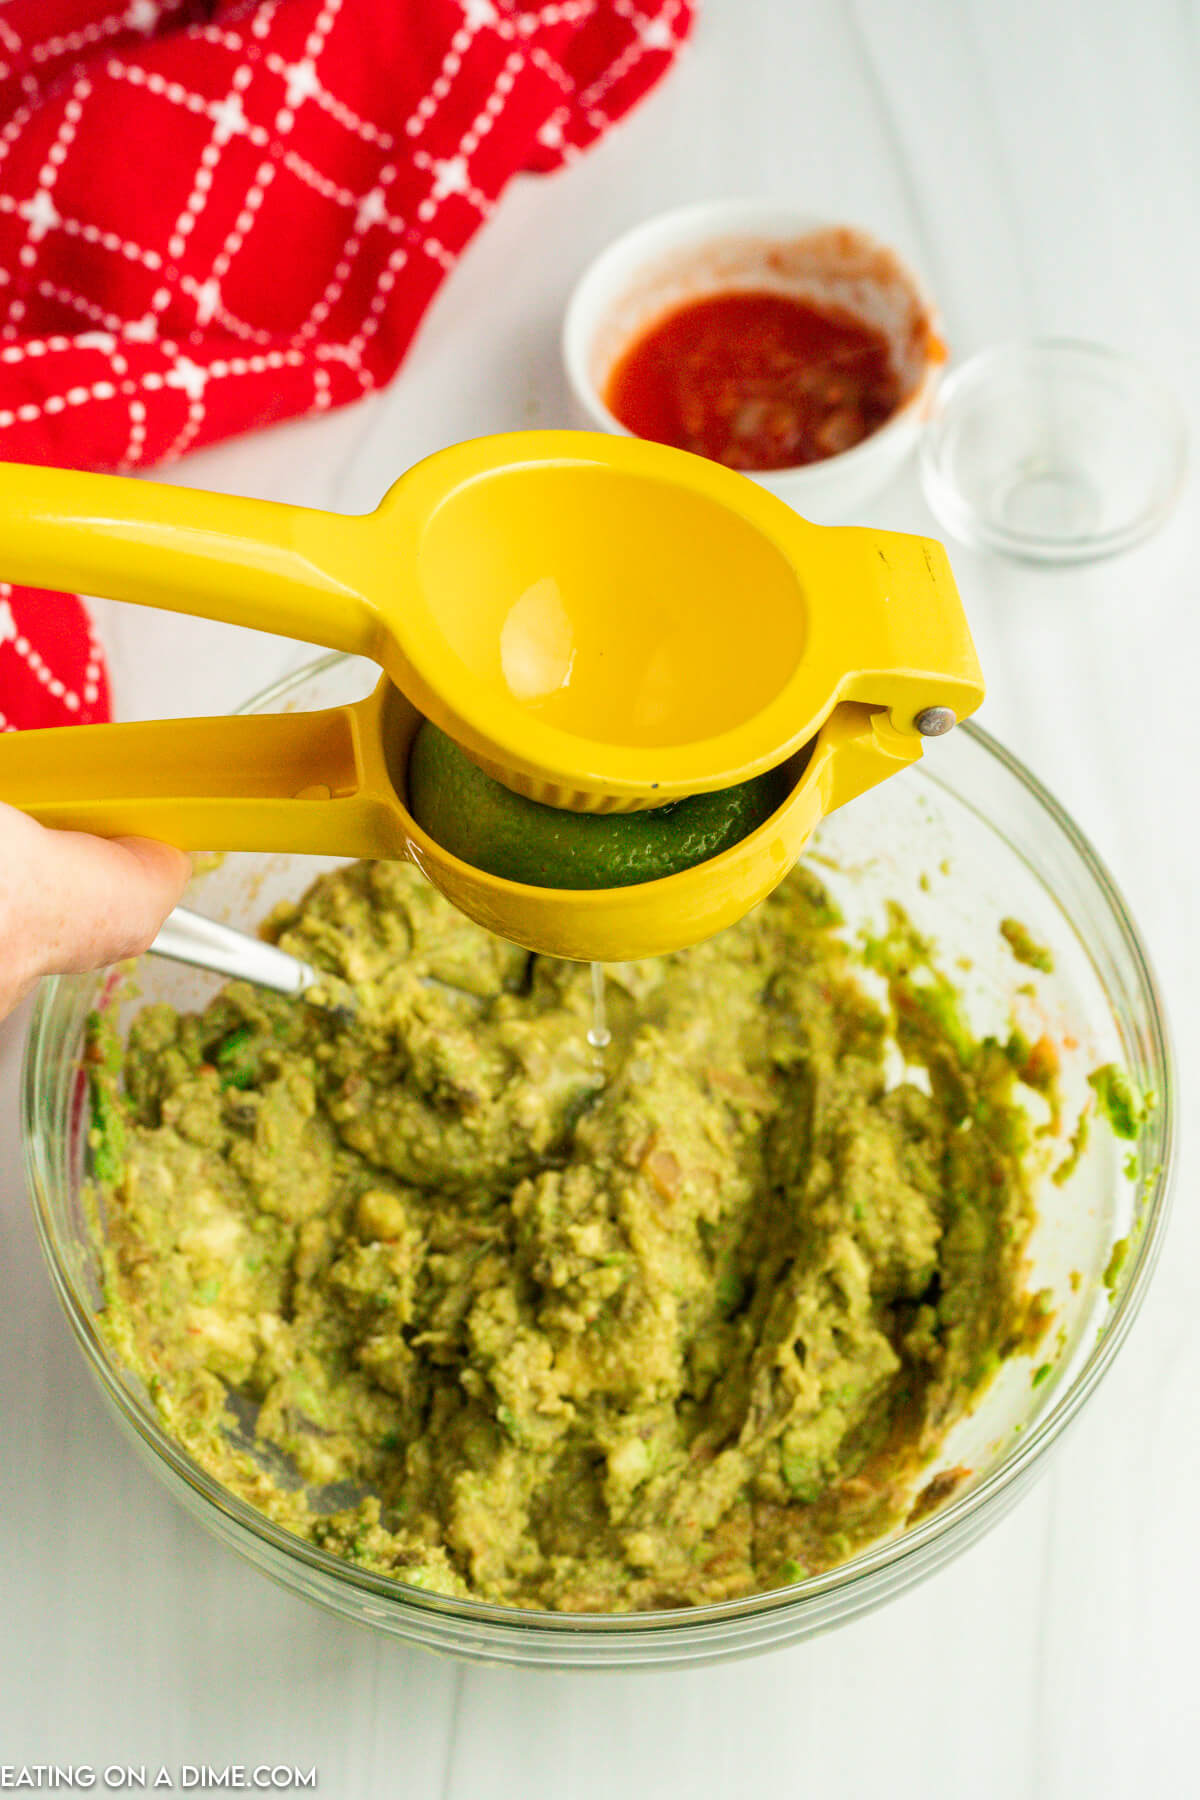 Squeezing fresh lime into the guacamole